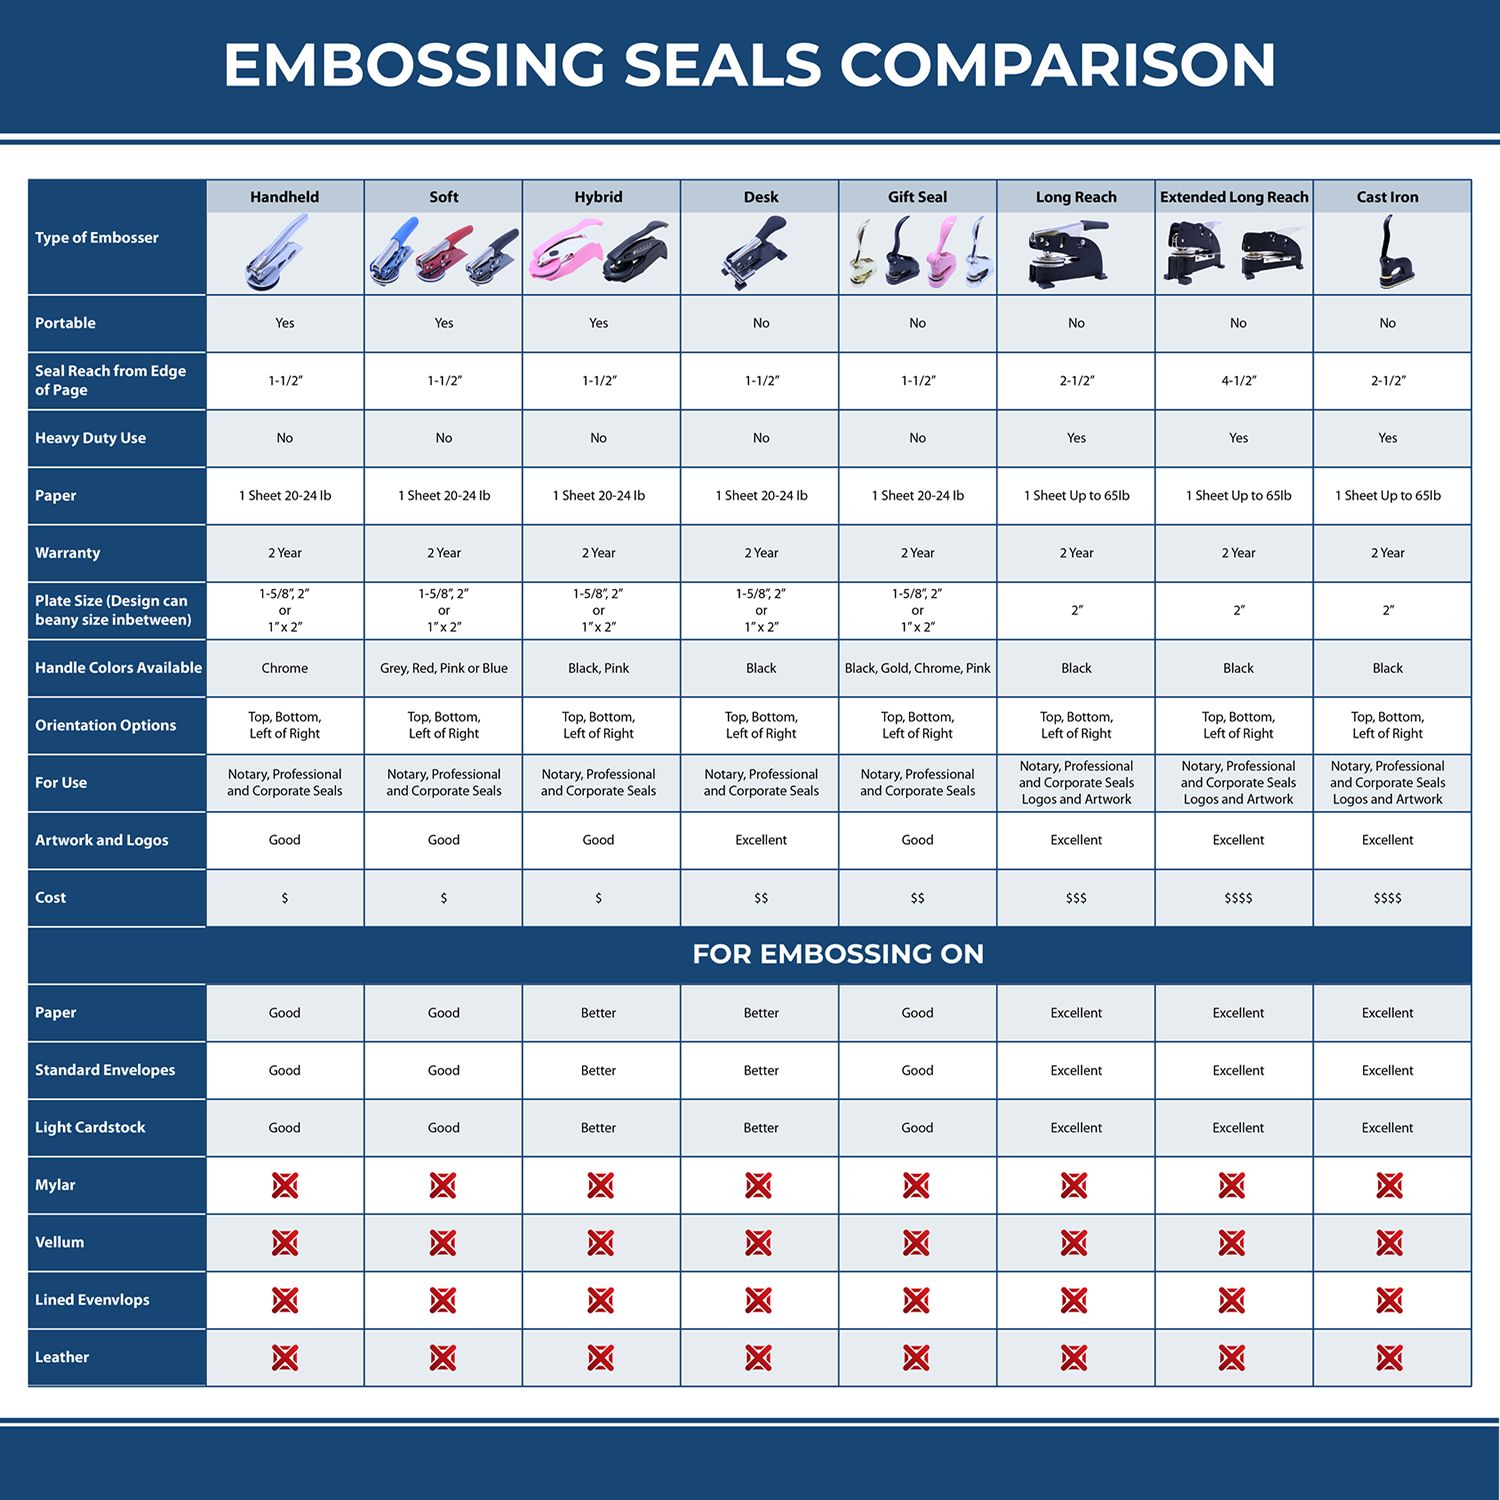 A comparison chart for the different types of mount models available for the Puerto Rico Engineer Desk Seal.